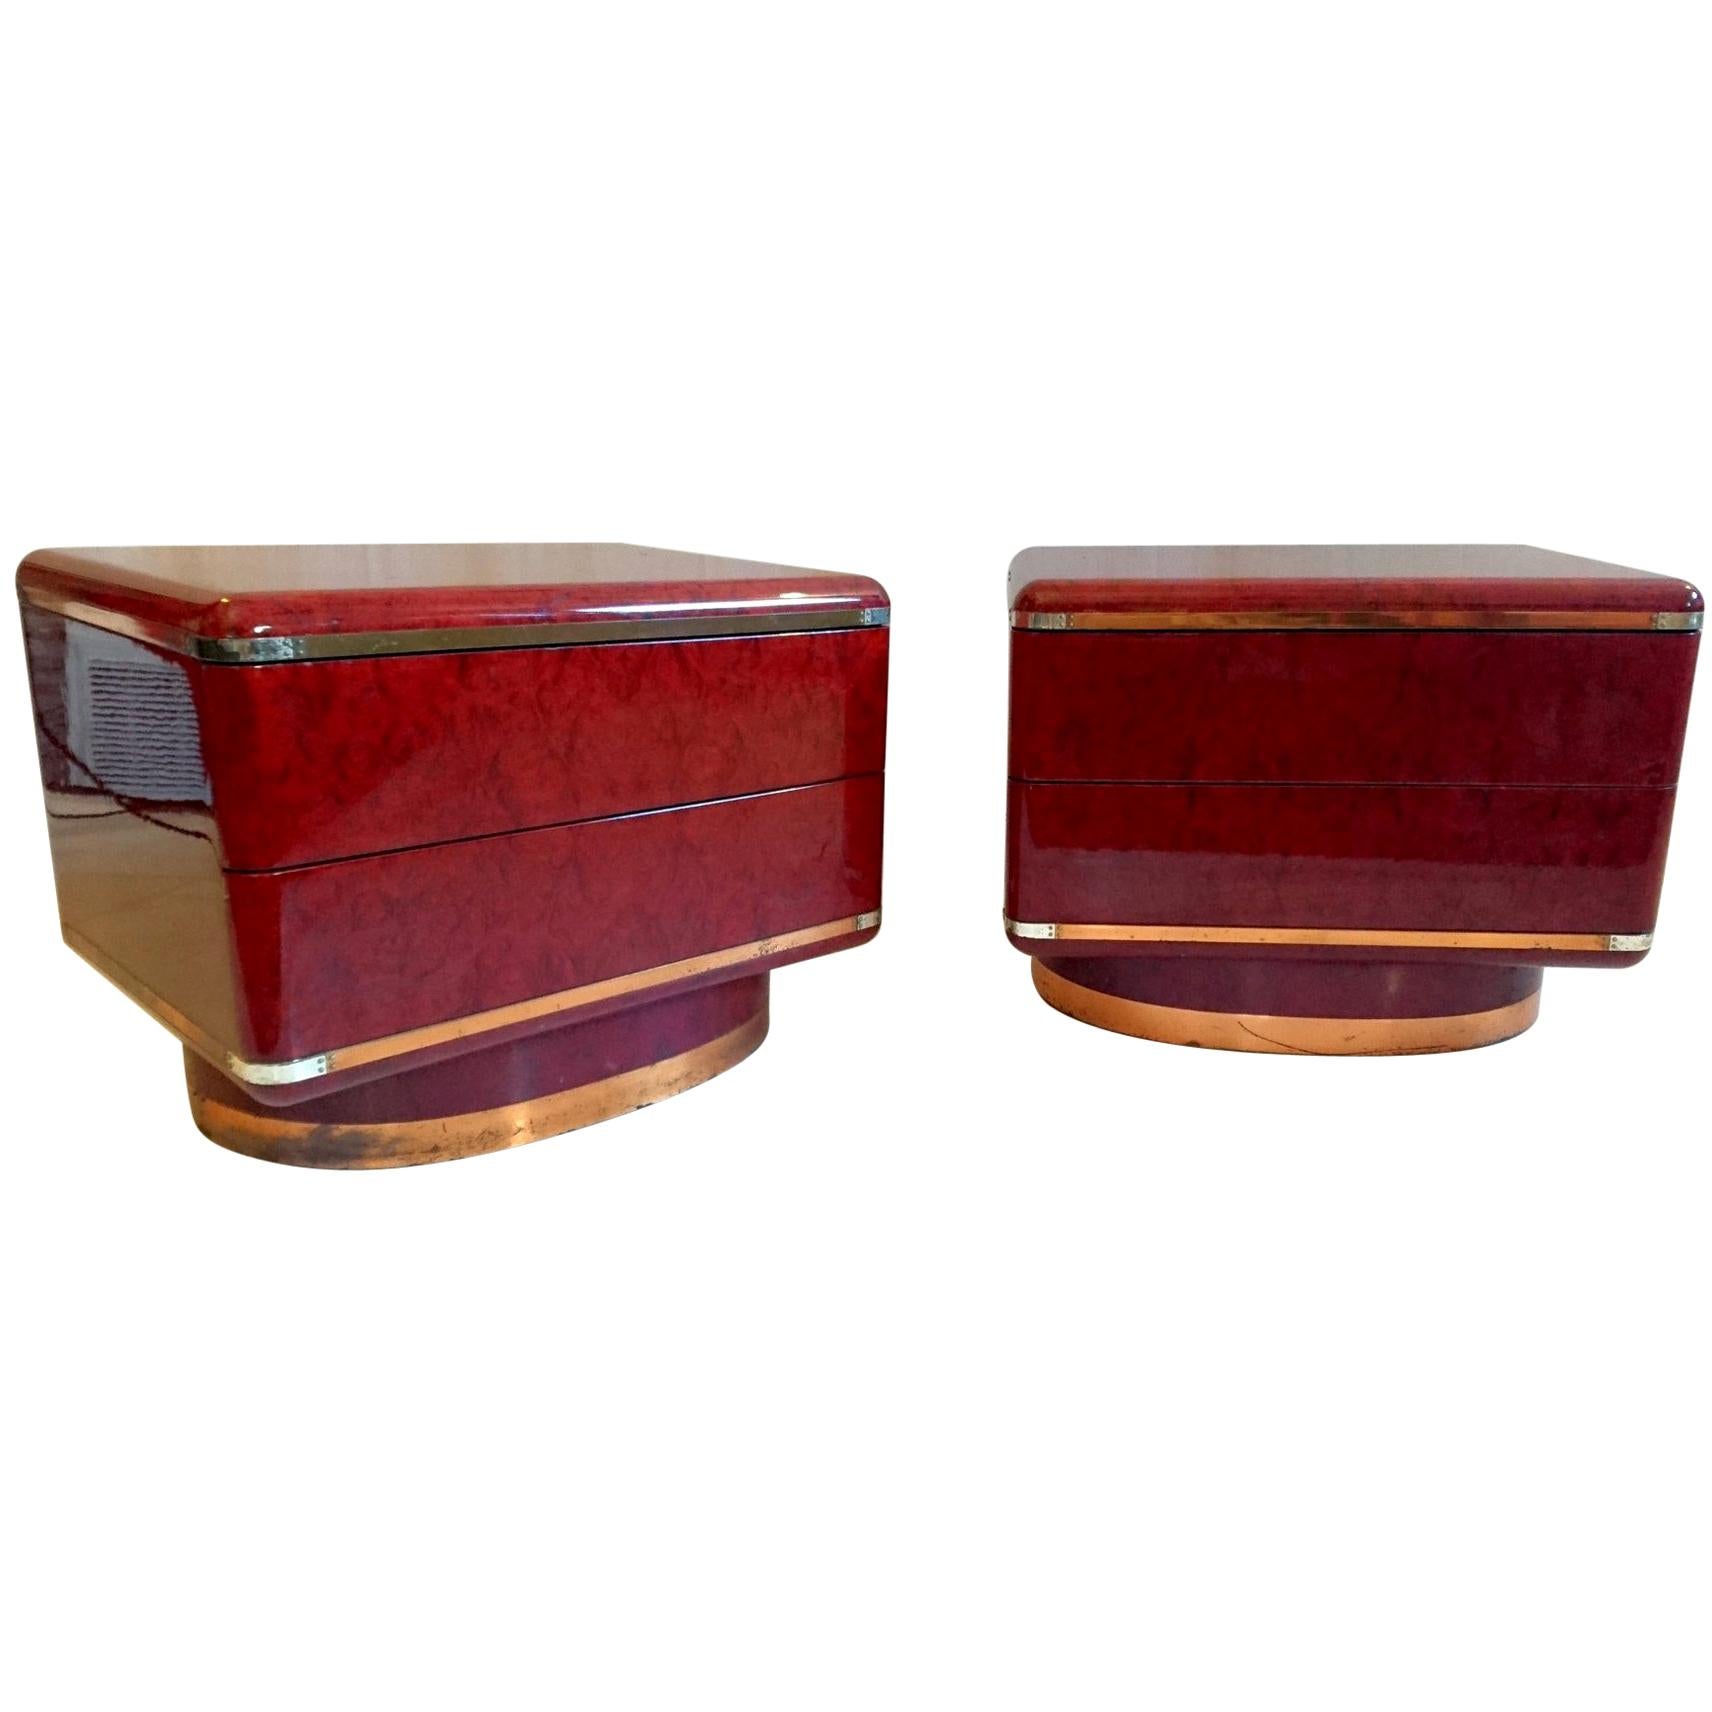 A pair of side/end tables/nightstands of very high quality. That are veneered in walnut root and copper colored metal with mahogany on the back. Each table has an oval shaped base two drawers. Great design with rounded corners and lines. The metal